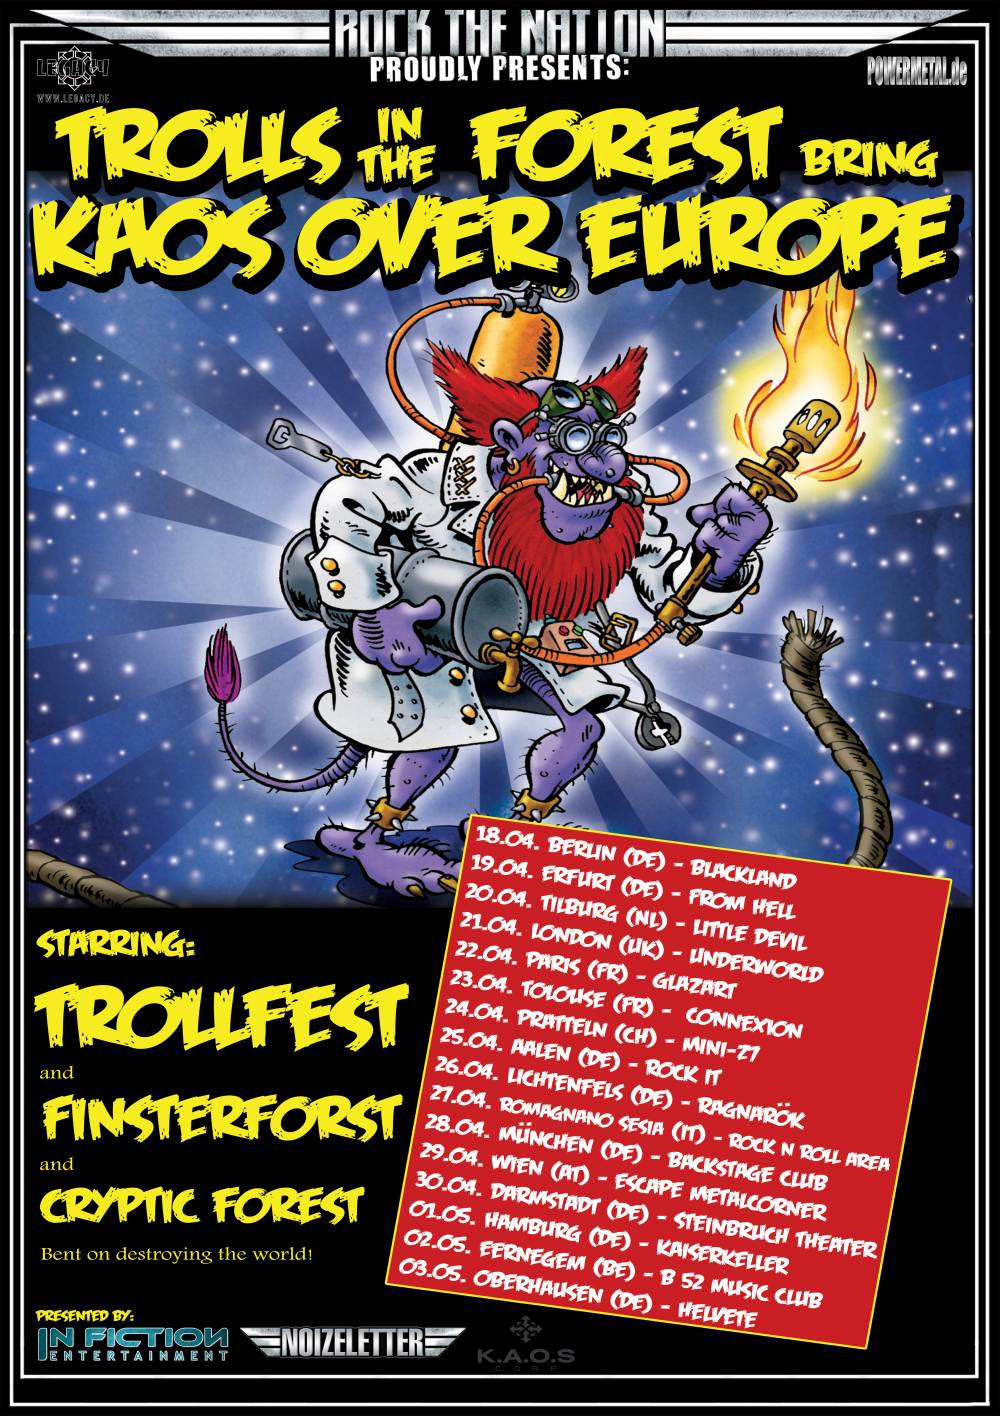 Trollfest - Finsterforst - Cryptic Forest - Trolls in the forest Tour 2014